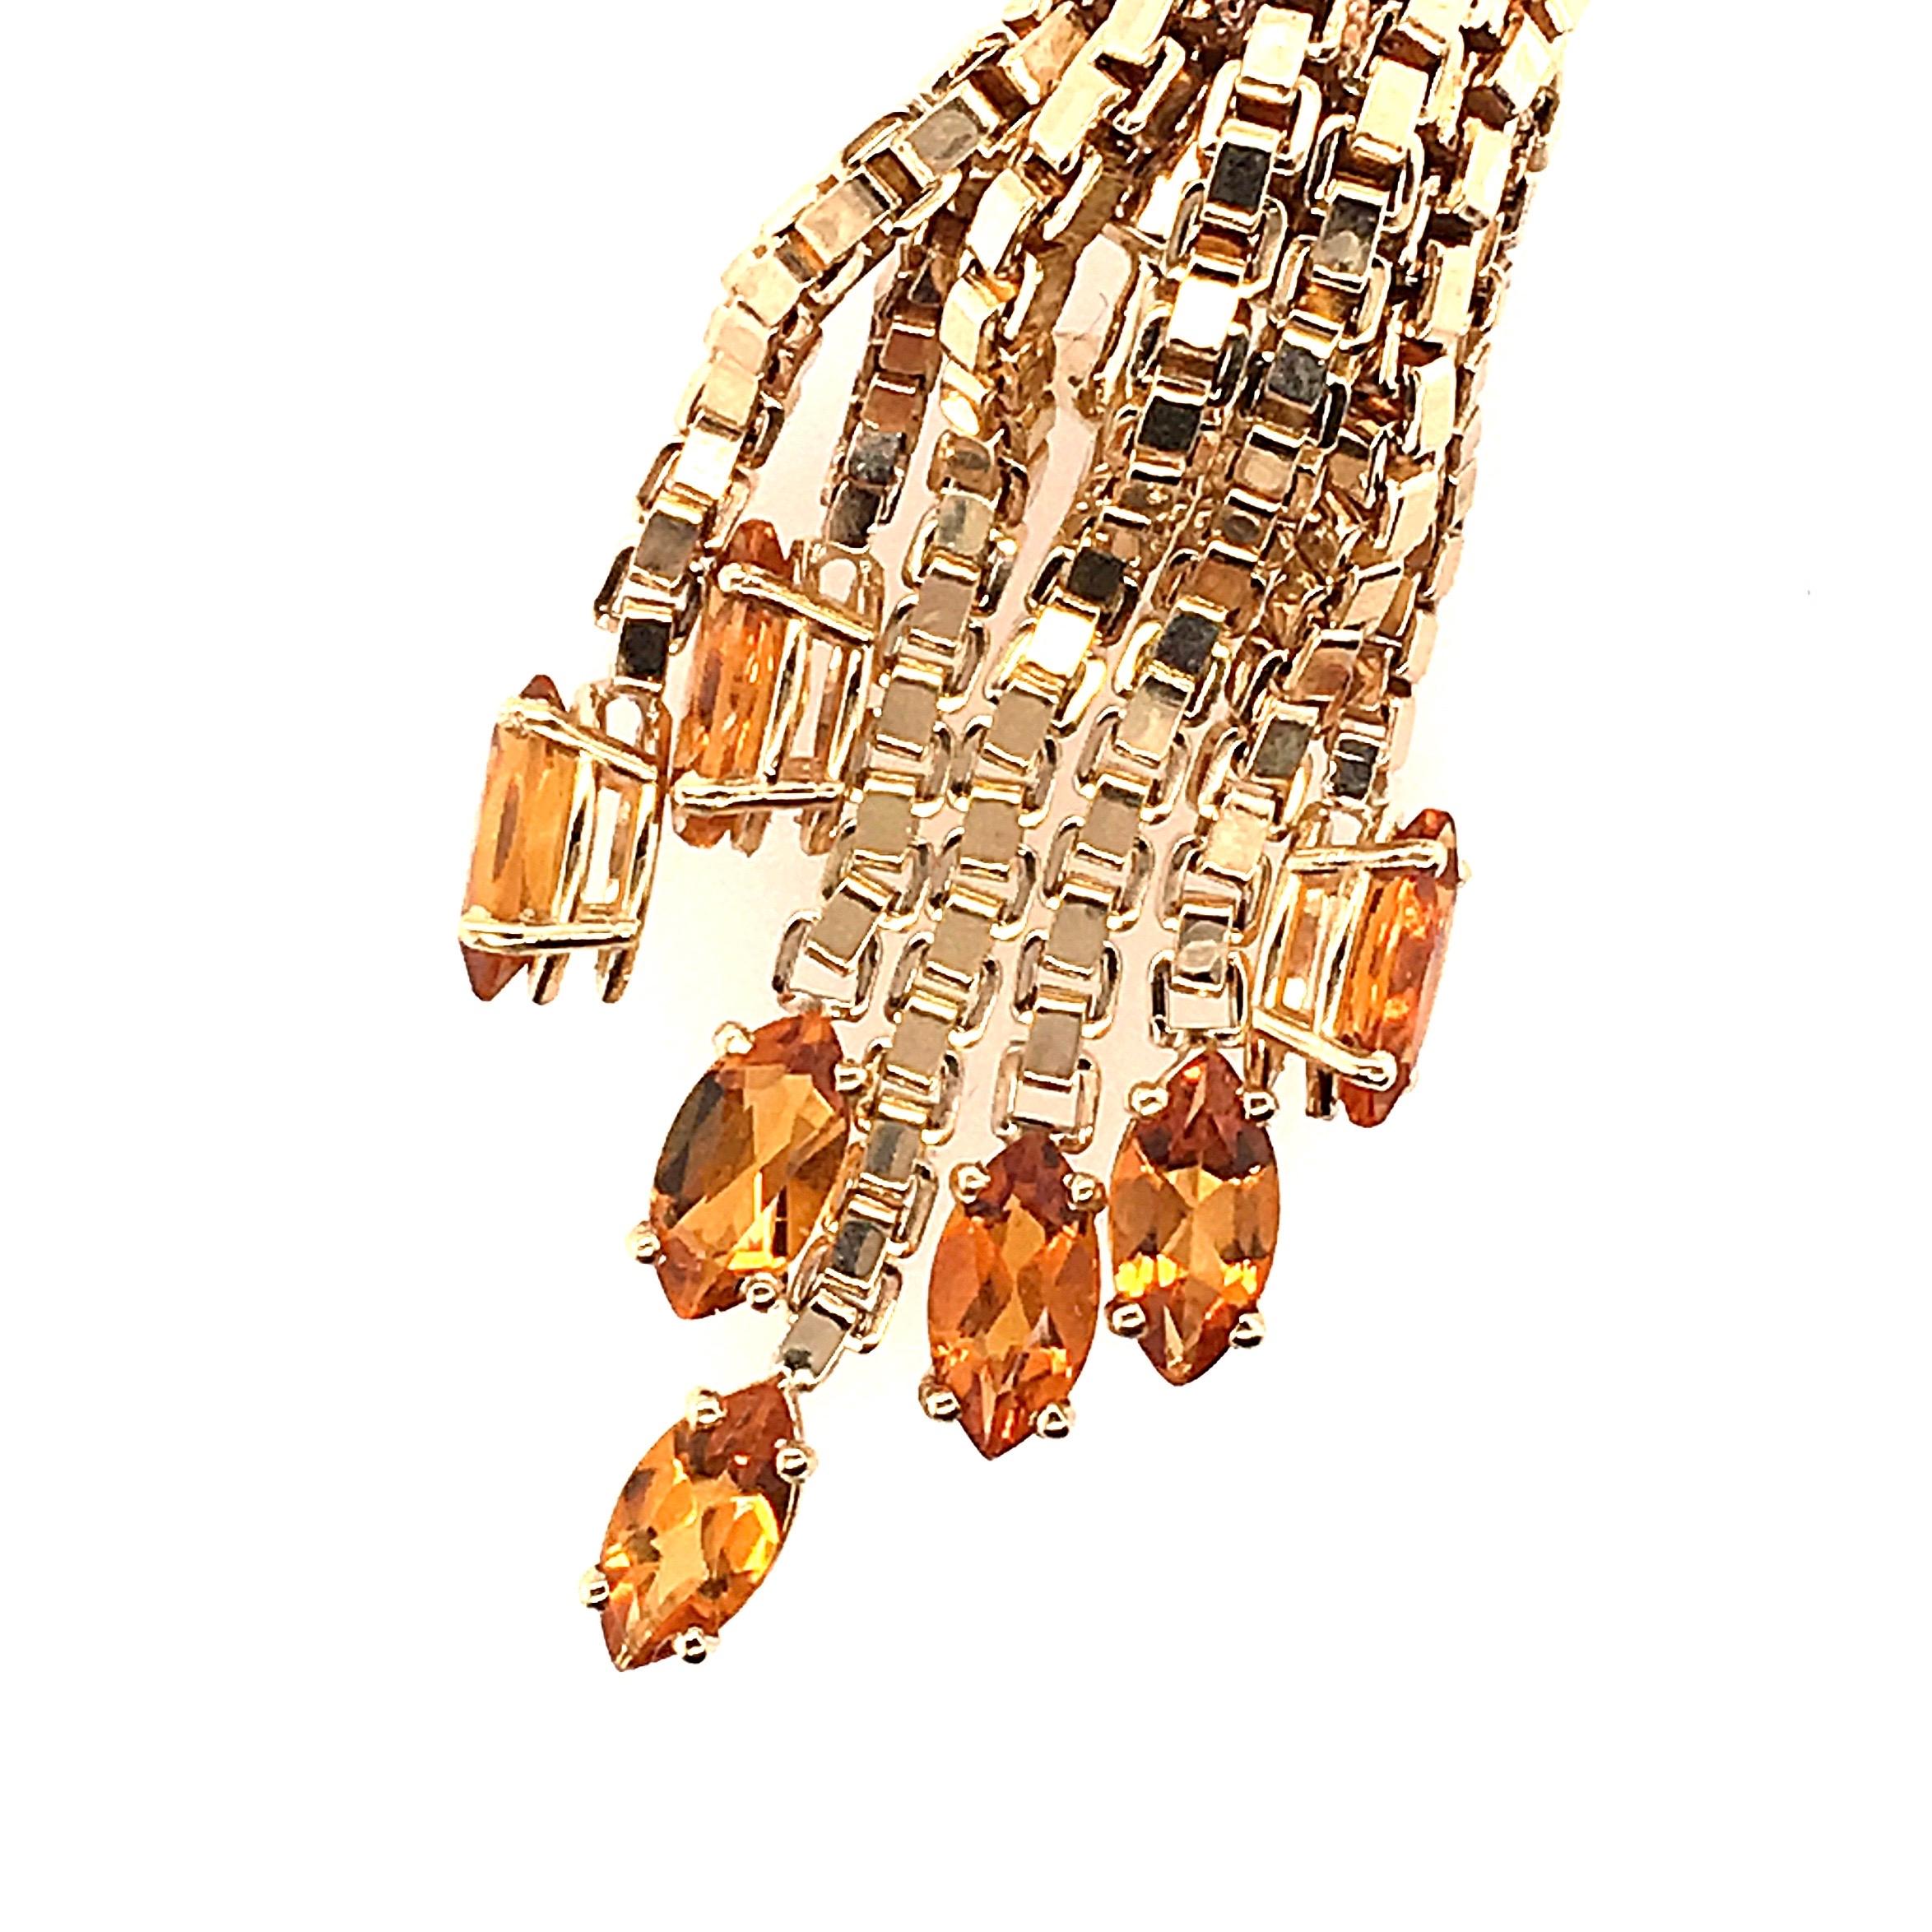 A pair of 14 karat yellow gold and citrine clip earrings with omega backs.  Each chandelier earring suspends seven prong-set 8x4mm marquise citrines from seven varying lengths of box chain.  A total of fourteen (14) marquise citrines is set in the